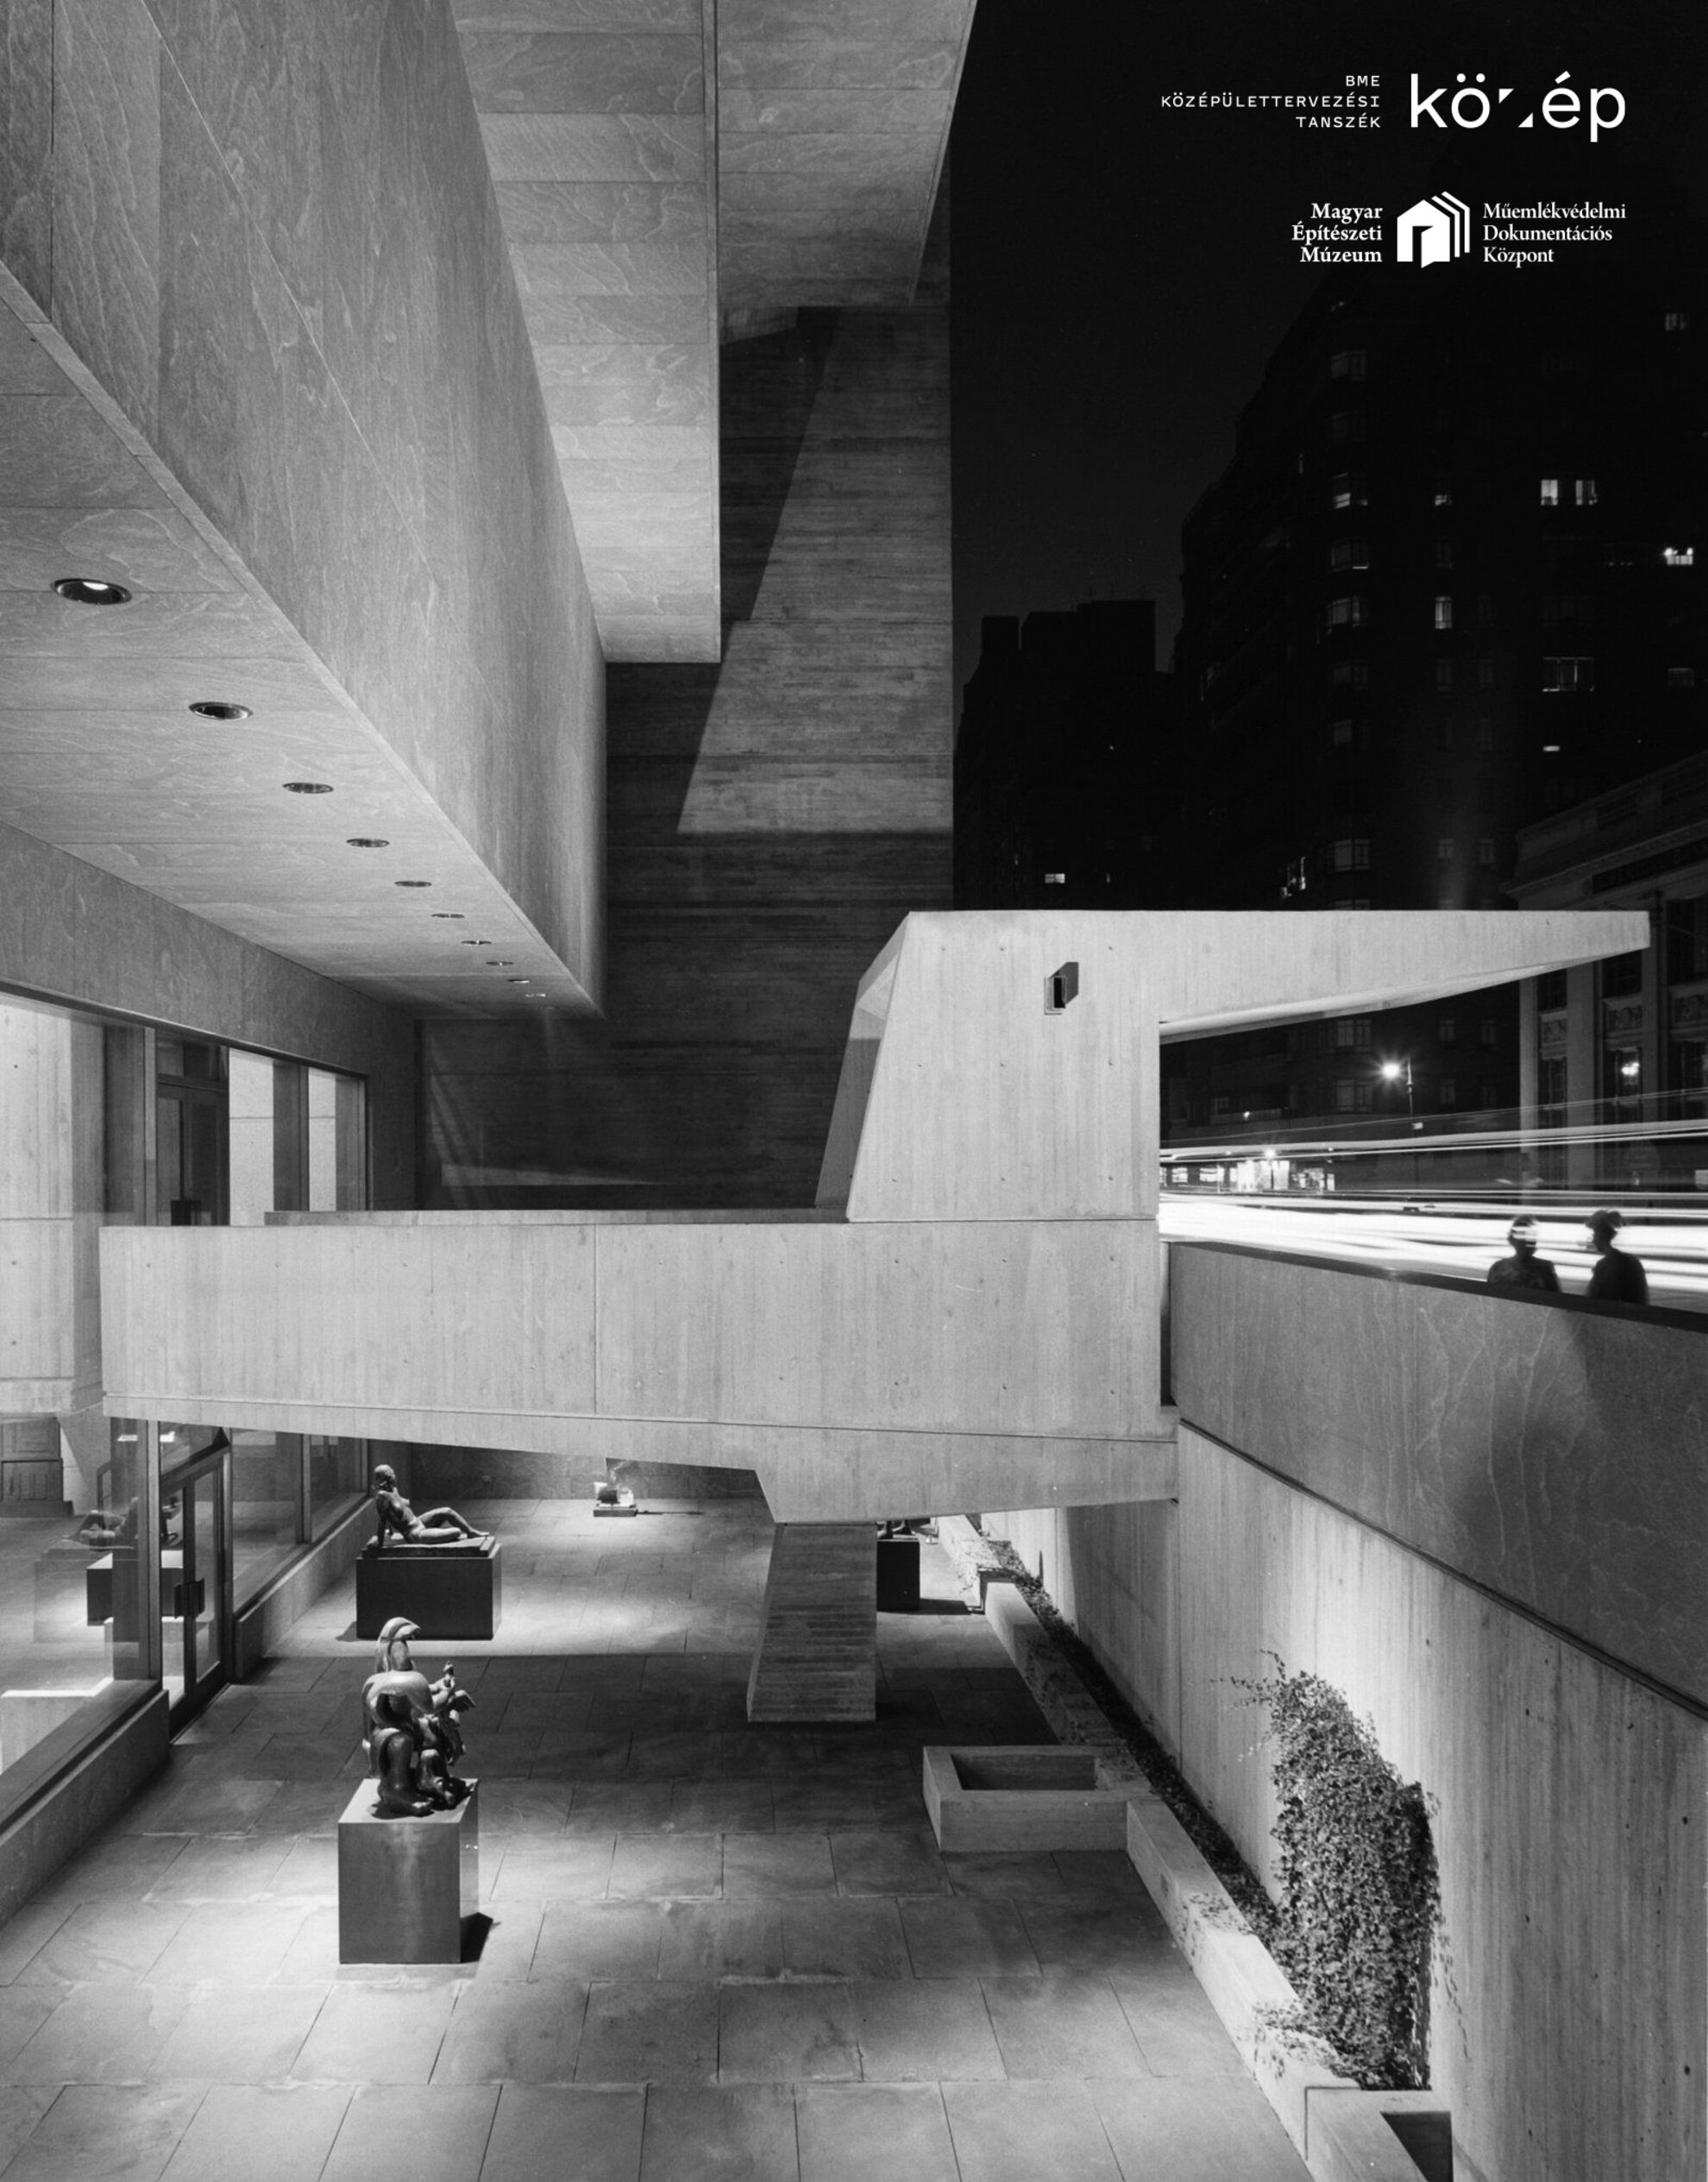 Barry Bergdoll: Marcel Breuer and the Invention of Heavy Lightness